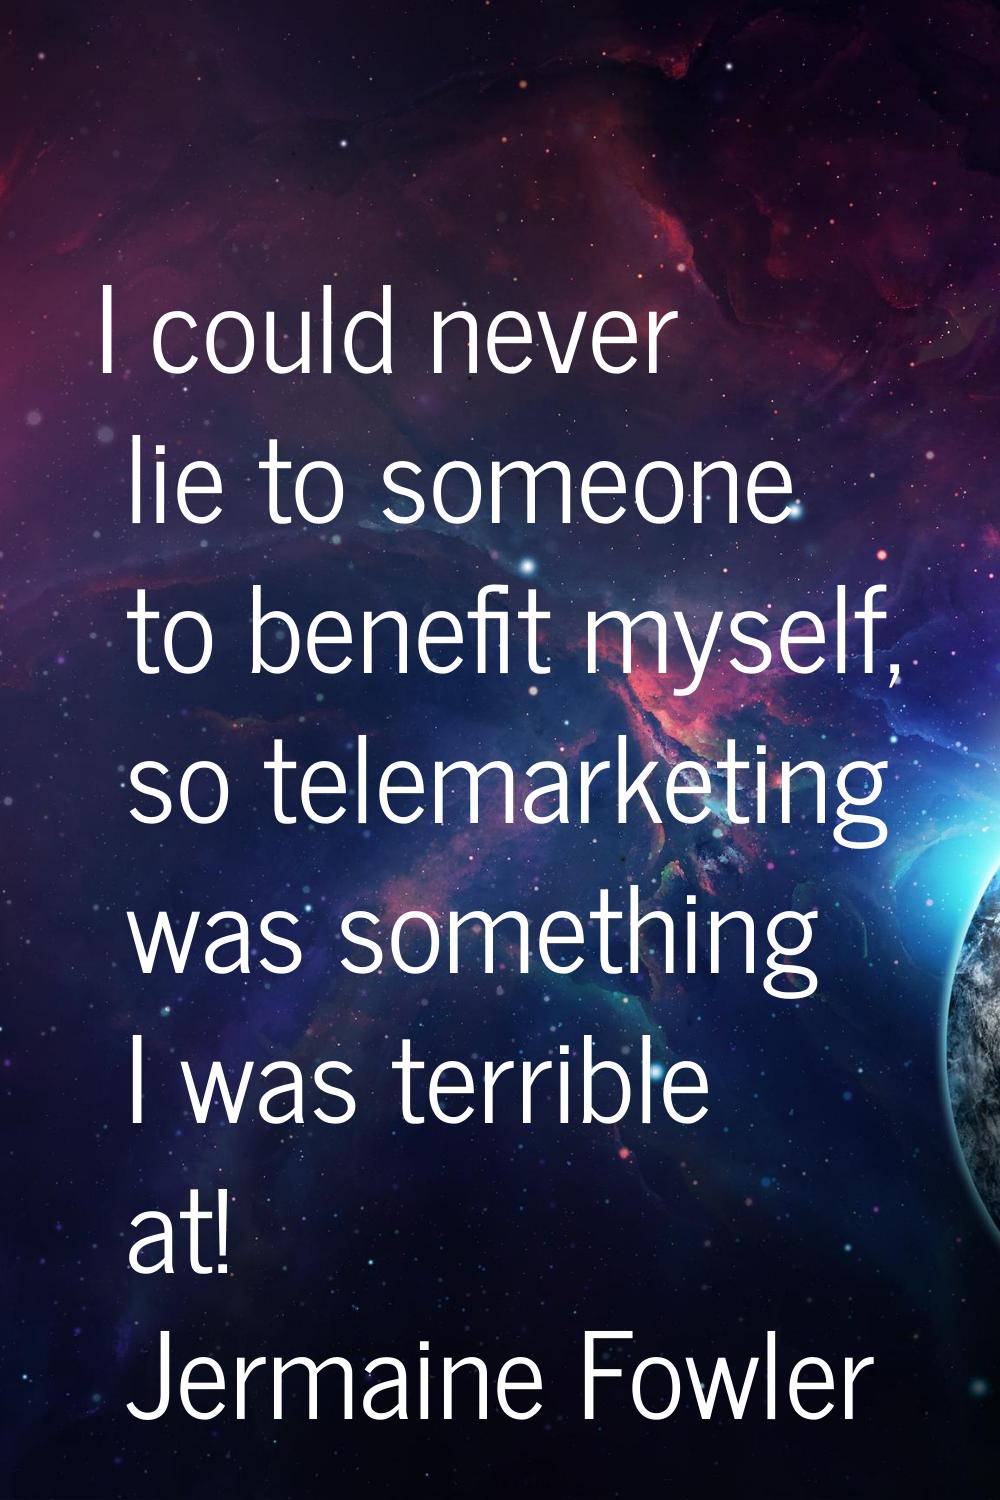 I could never lie to someone to benefit myself, so telemarketing was something I was terrible at!